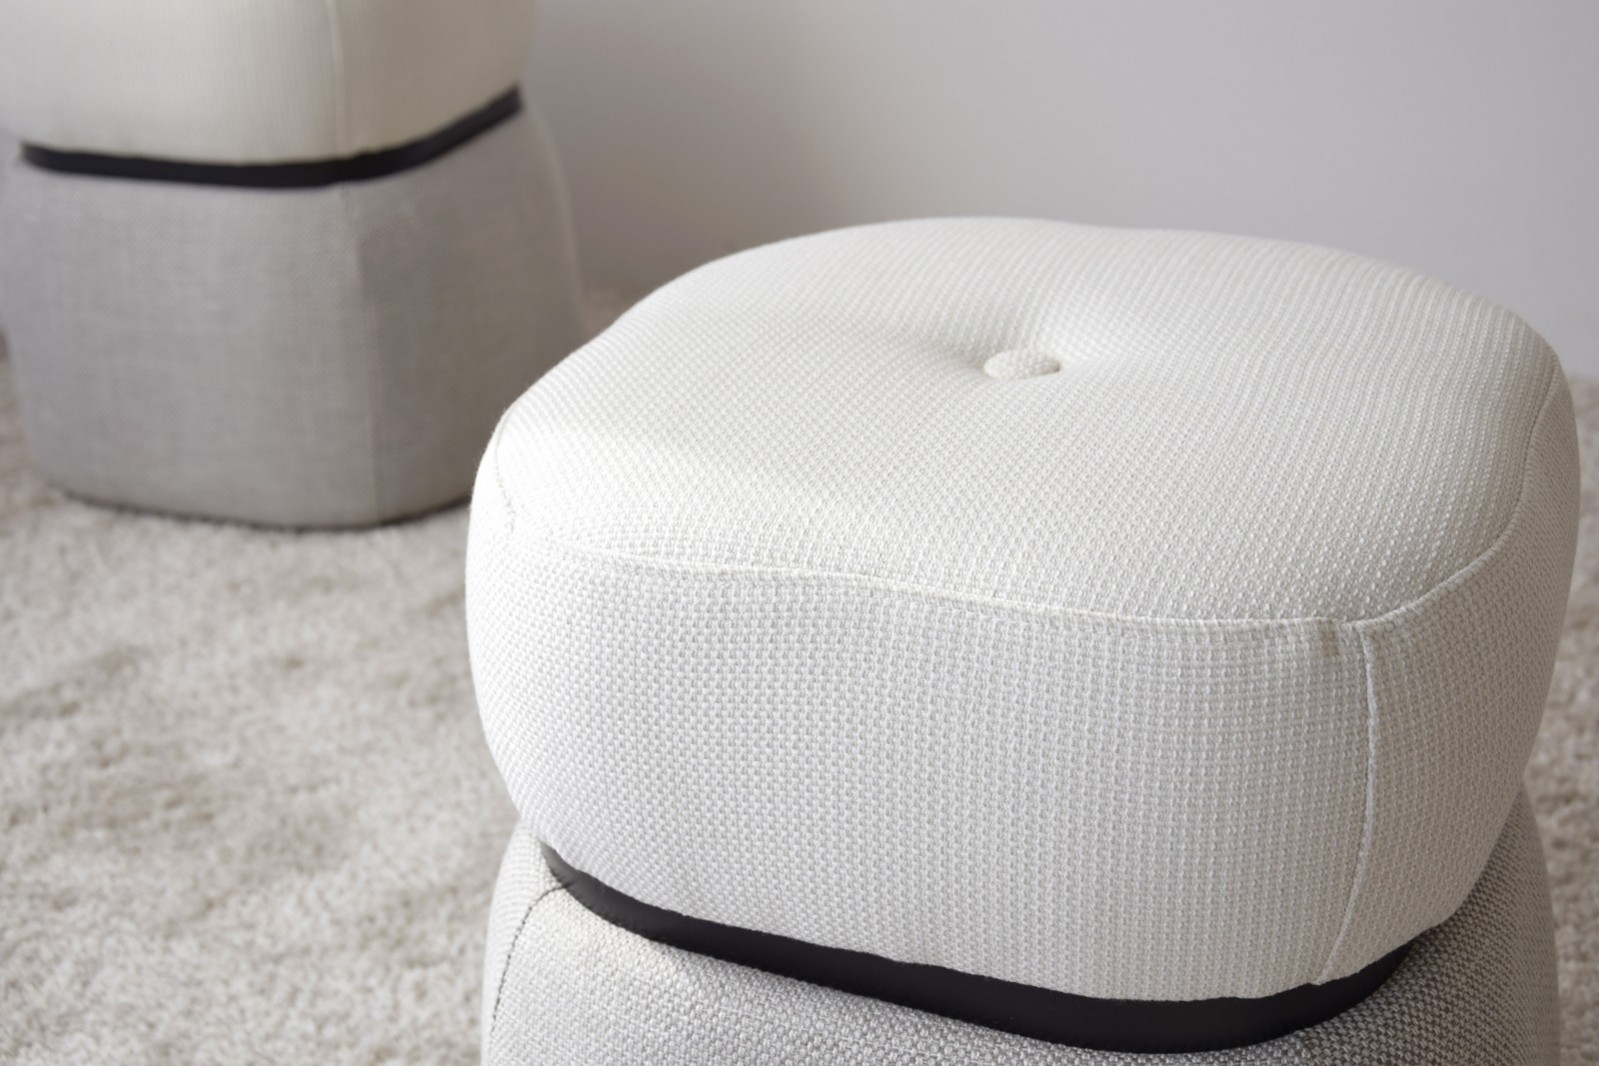 SET 2 SQUARE POUFS. IVORY AND GREY TONES